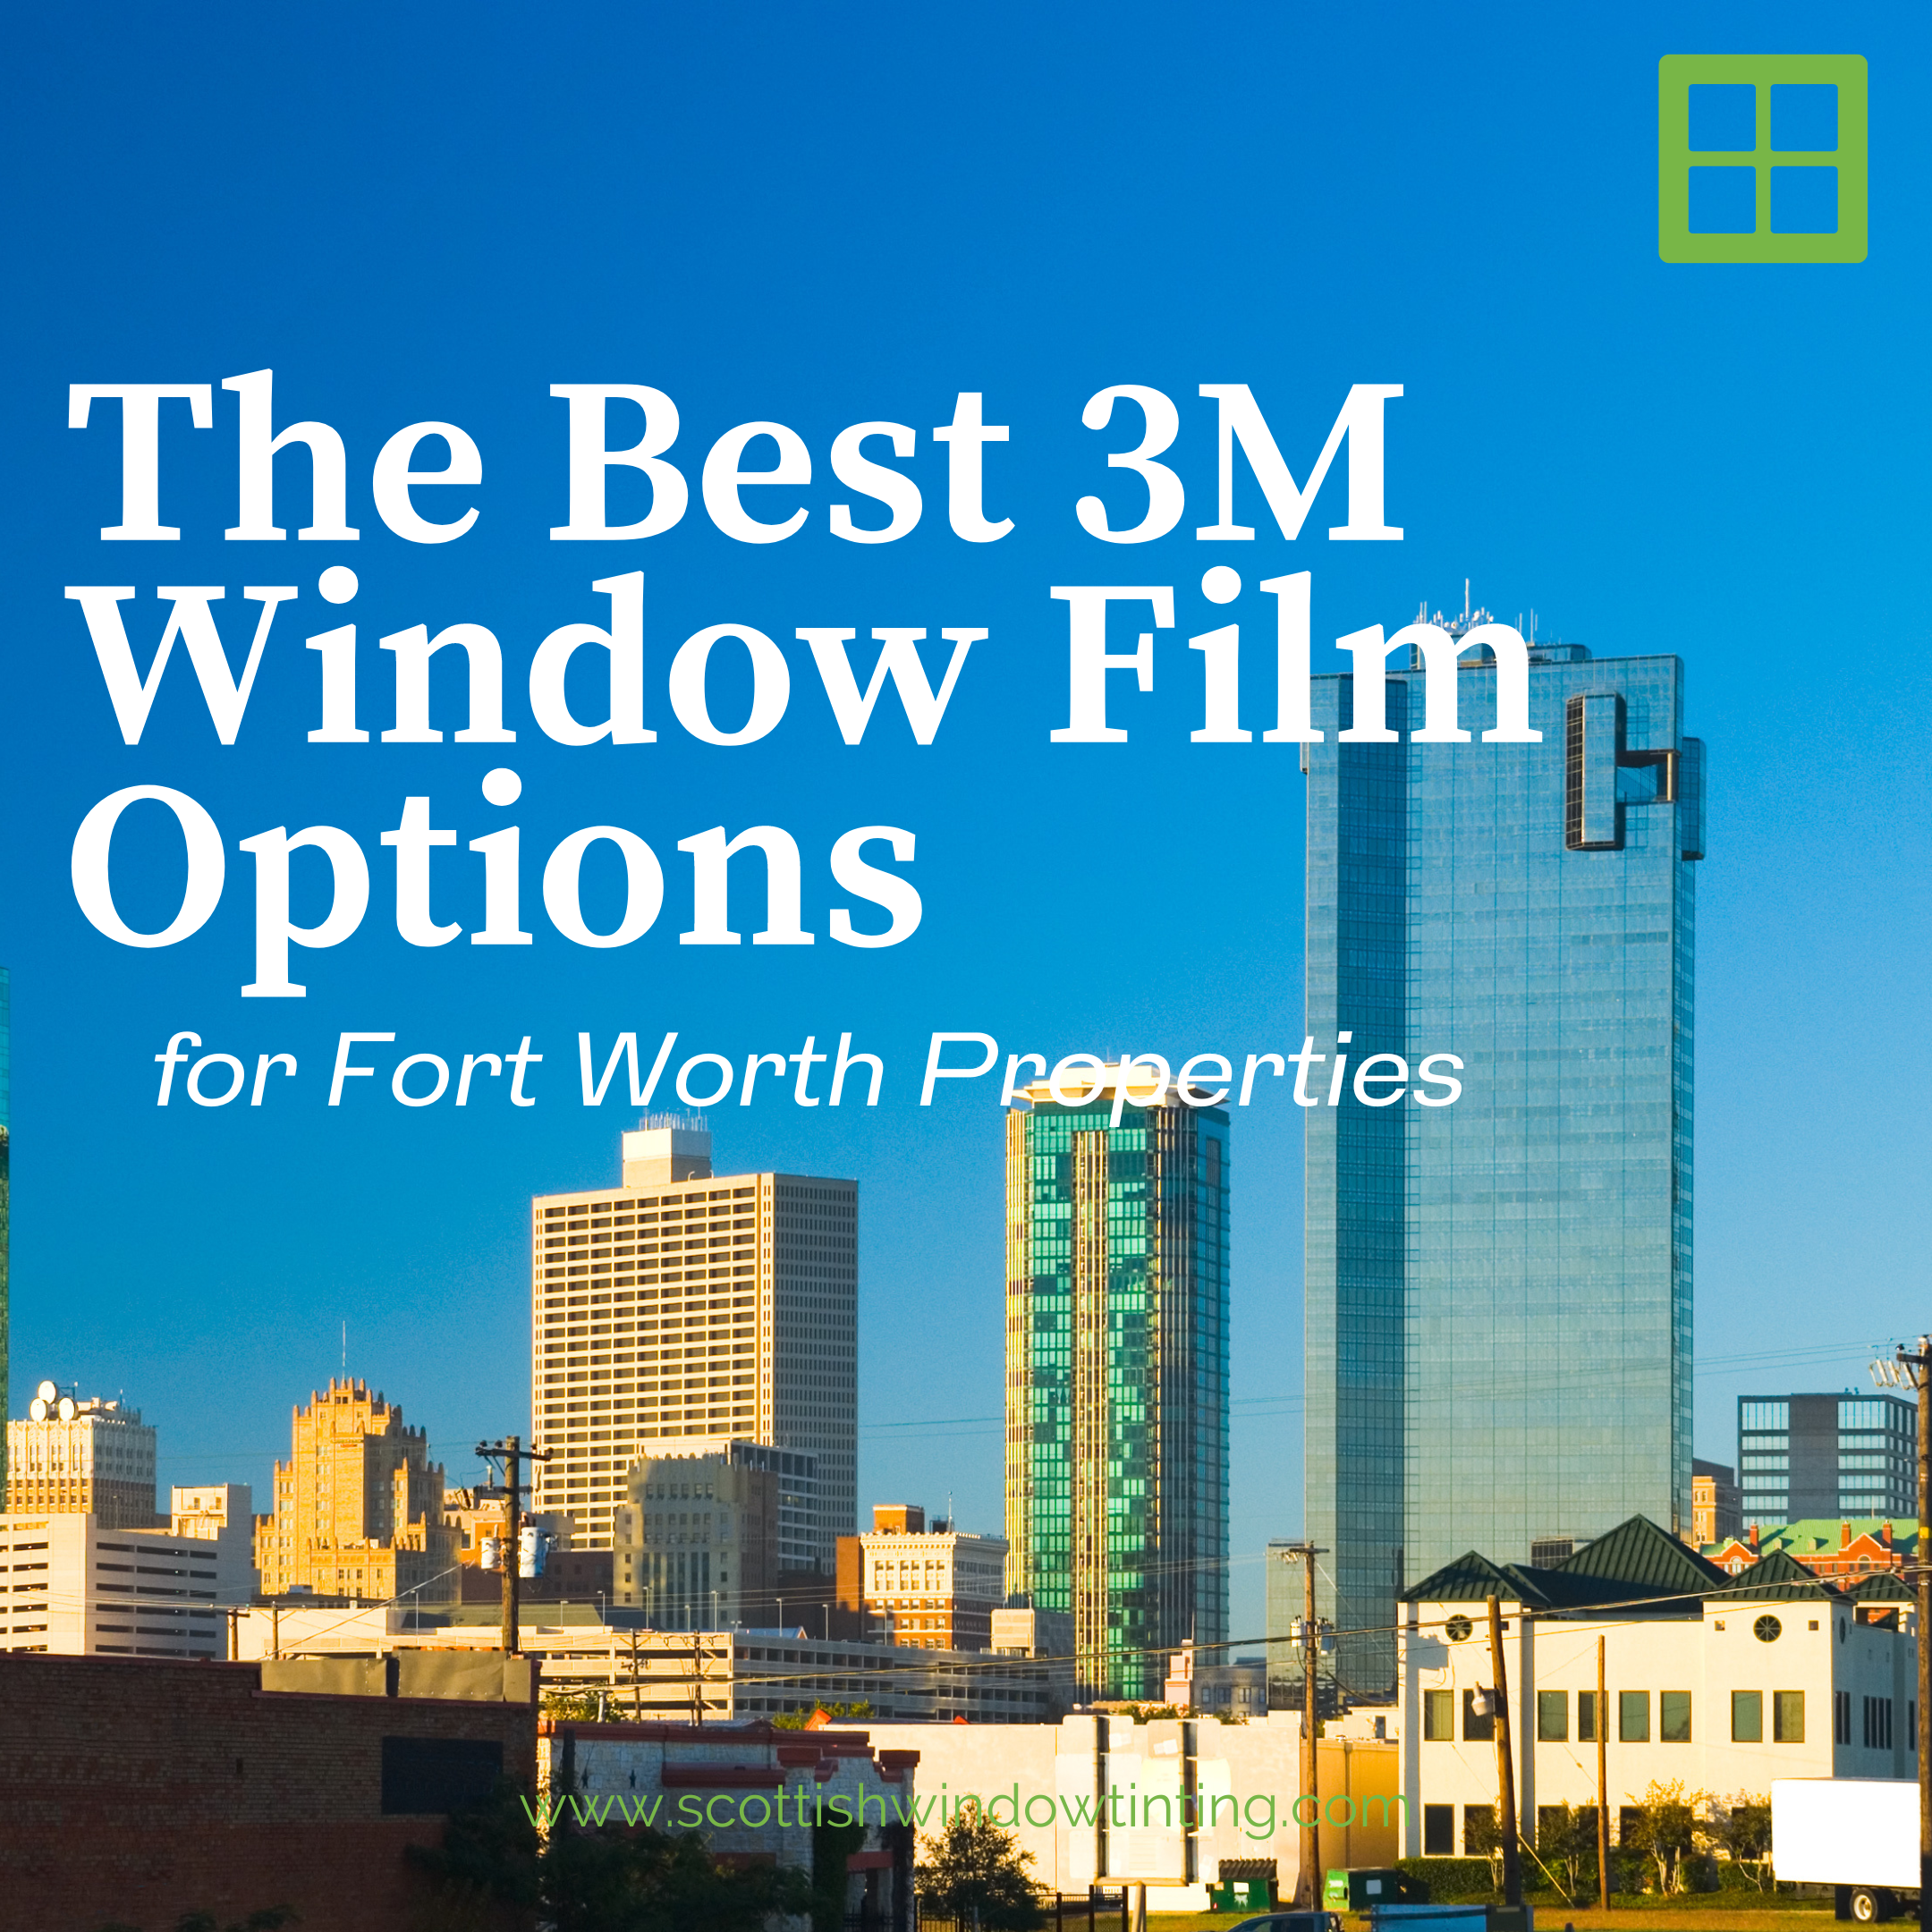 The Best 3M Window Film Options for Fort Worth Properties